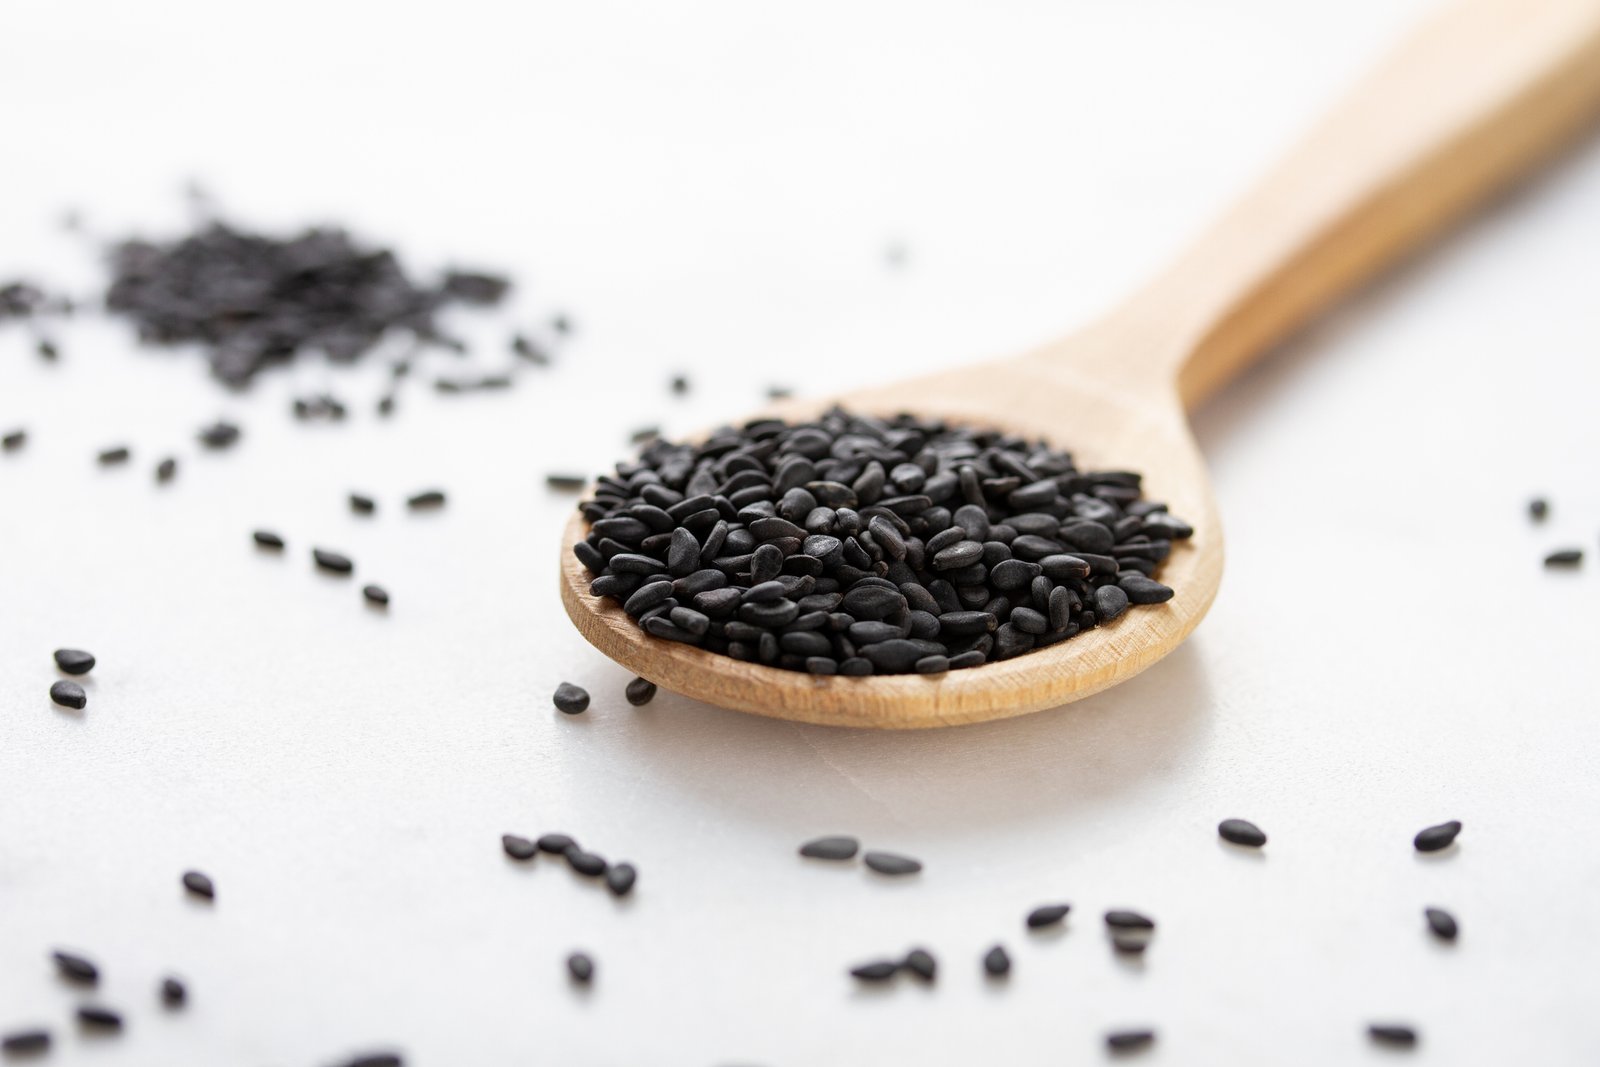 Black sesame seeds in a wooden spoon on a white background